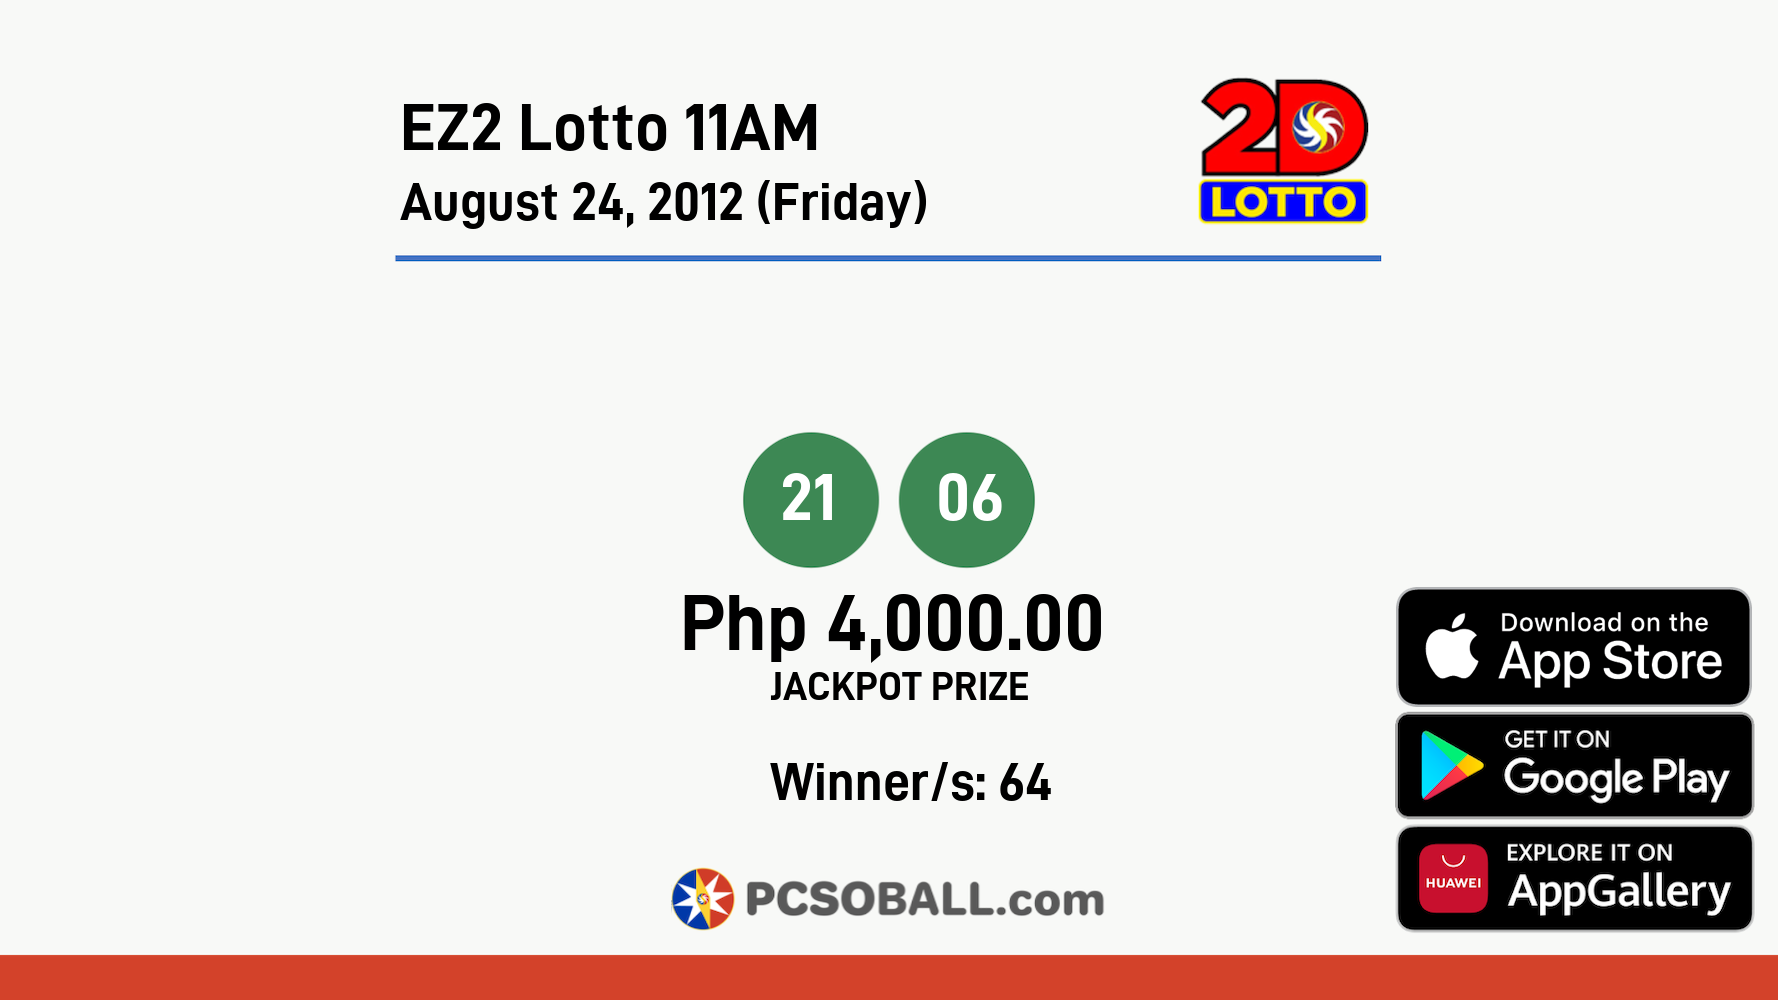 EZ2 Lotto 11AM August 24, 2012 (Friday) Result